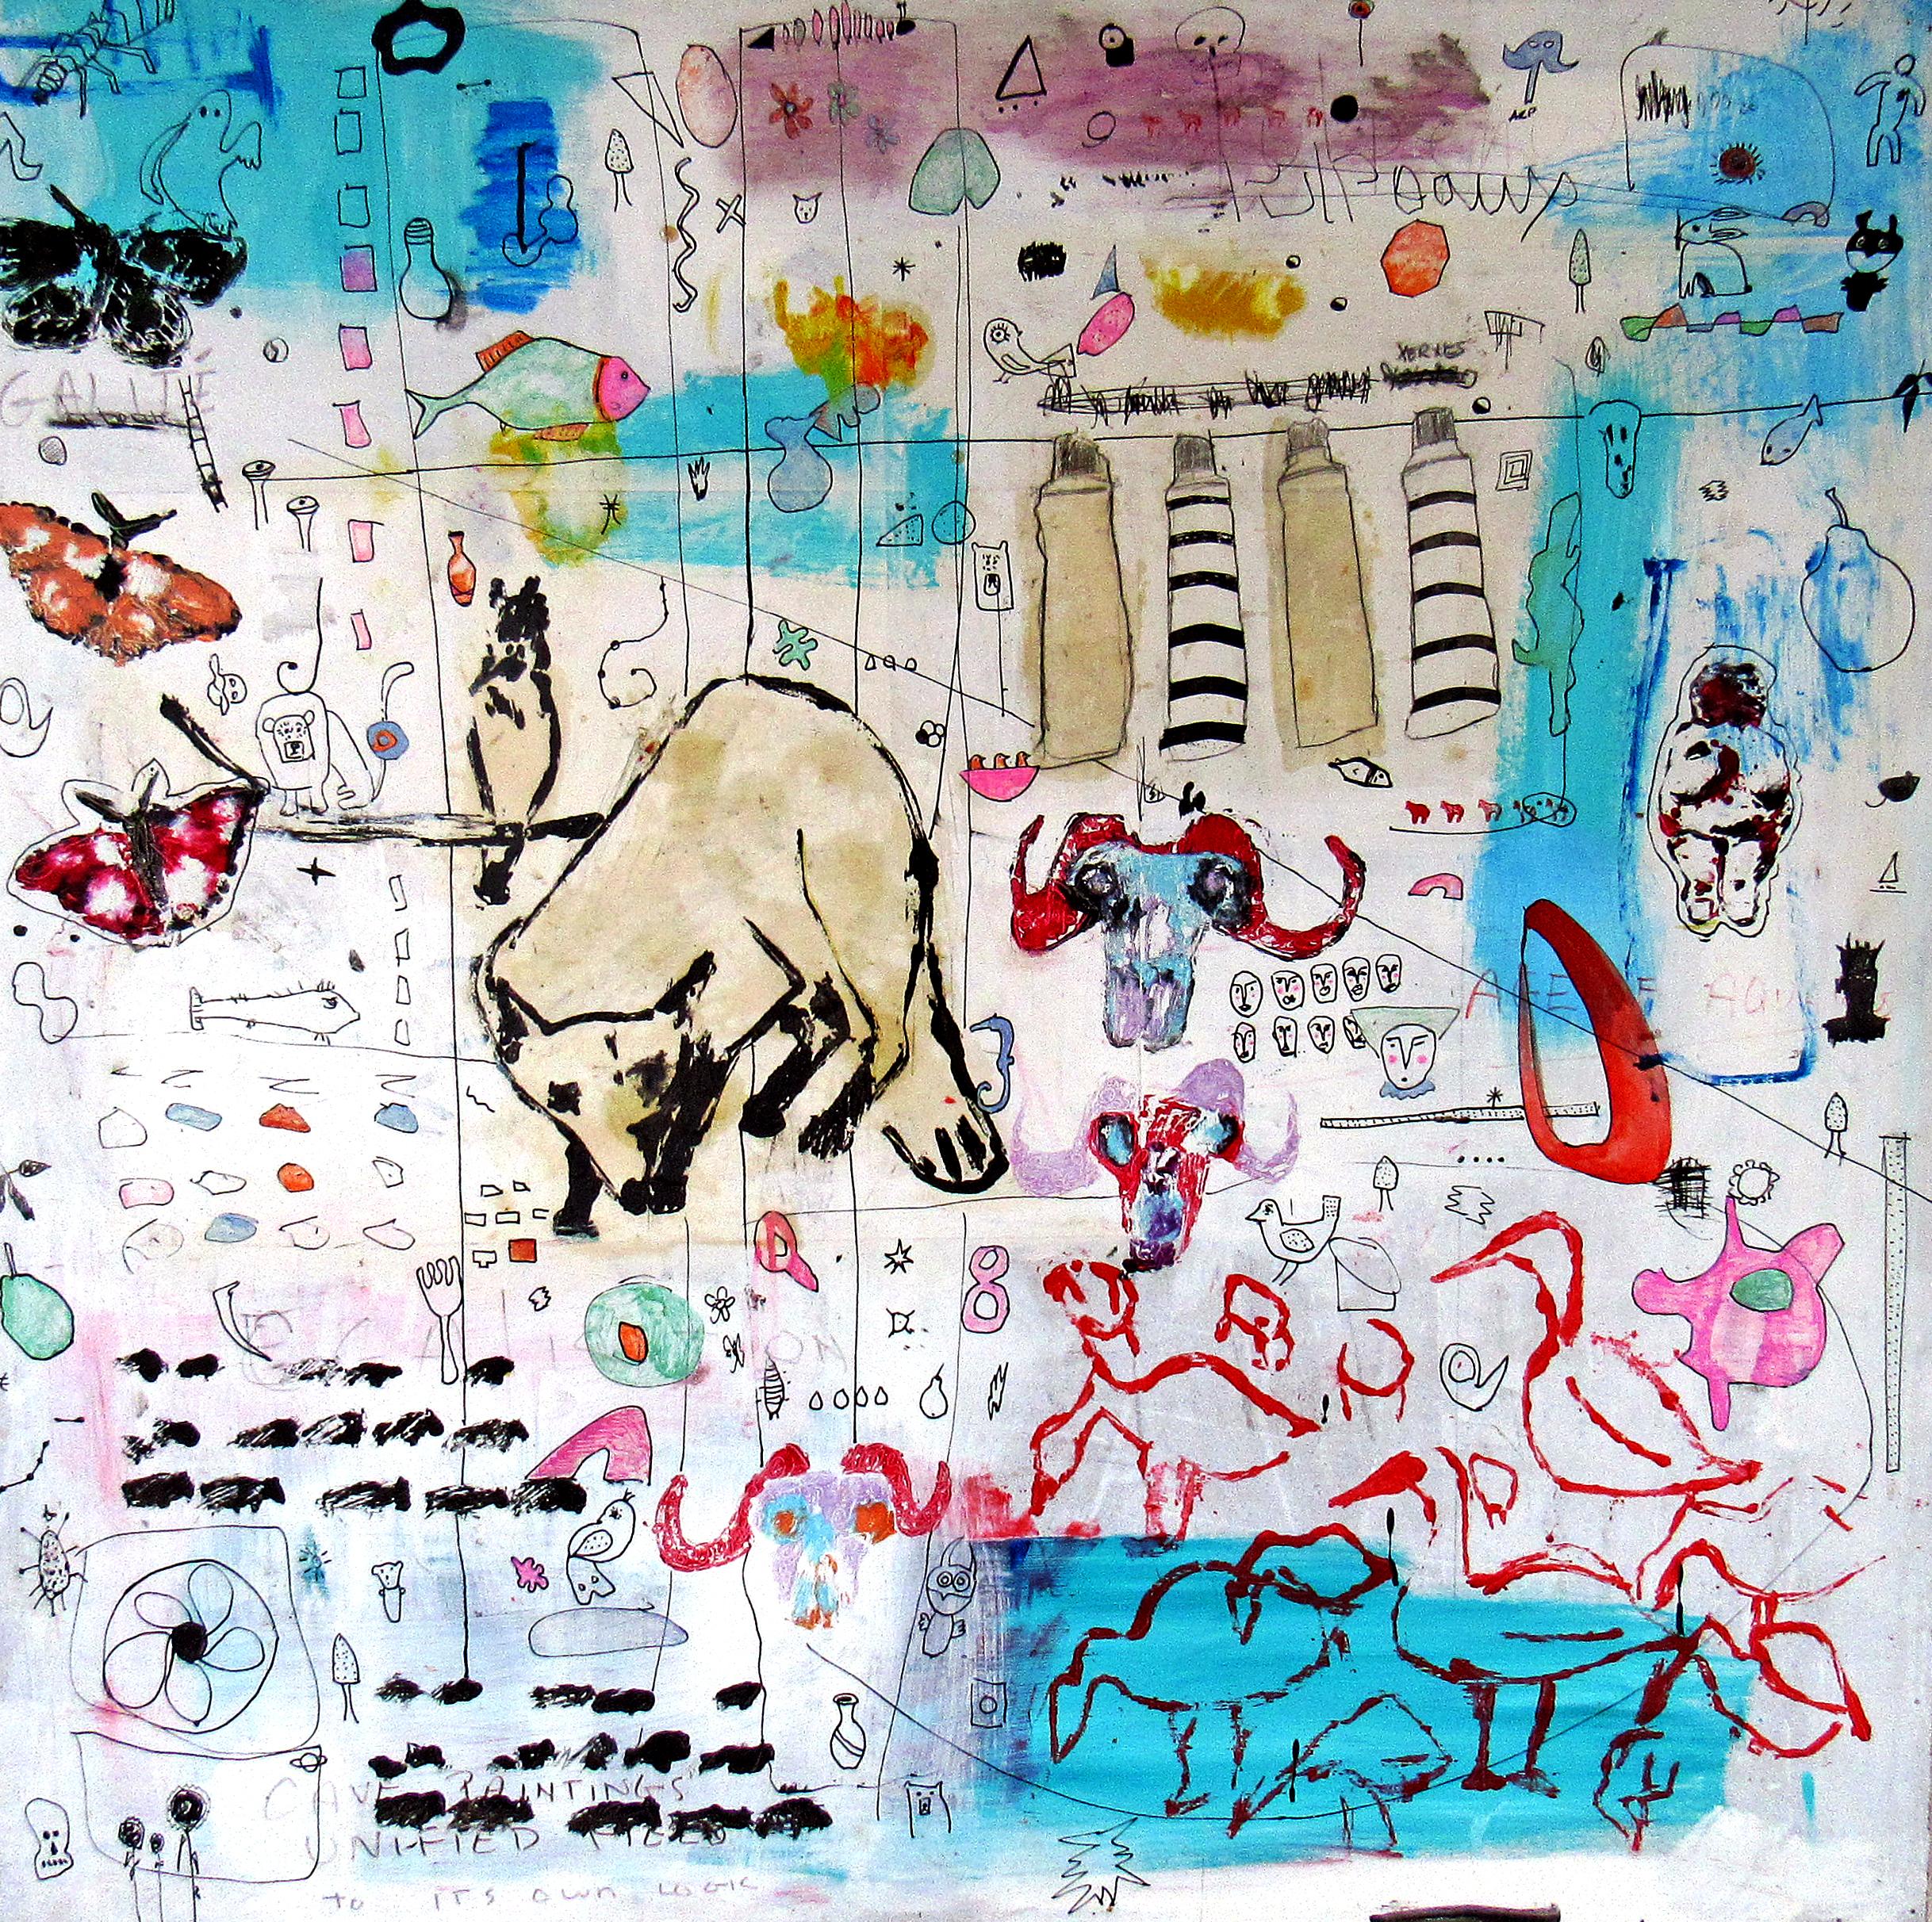 C. Dimitri Animal Painting - Axial Age, abstract iconography, white w blues, colors animals, text, patterns